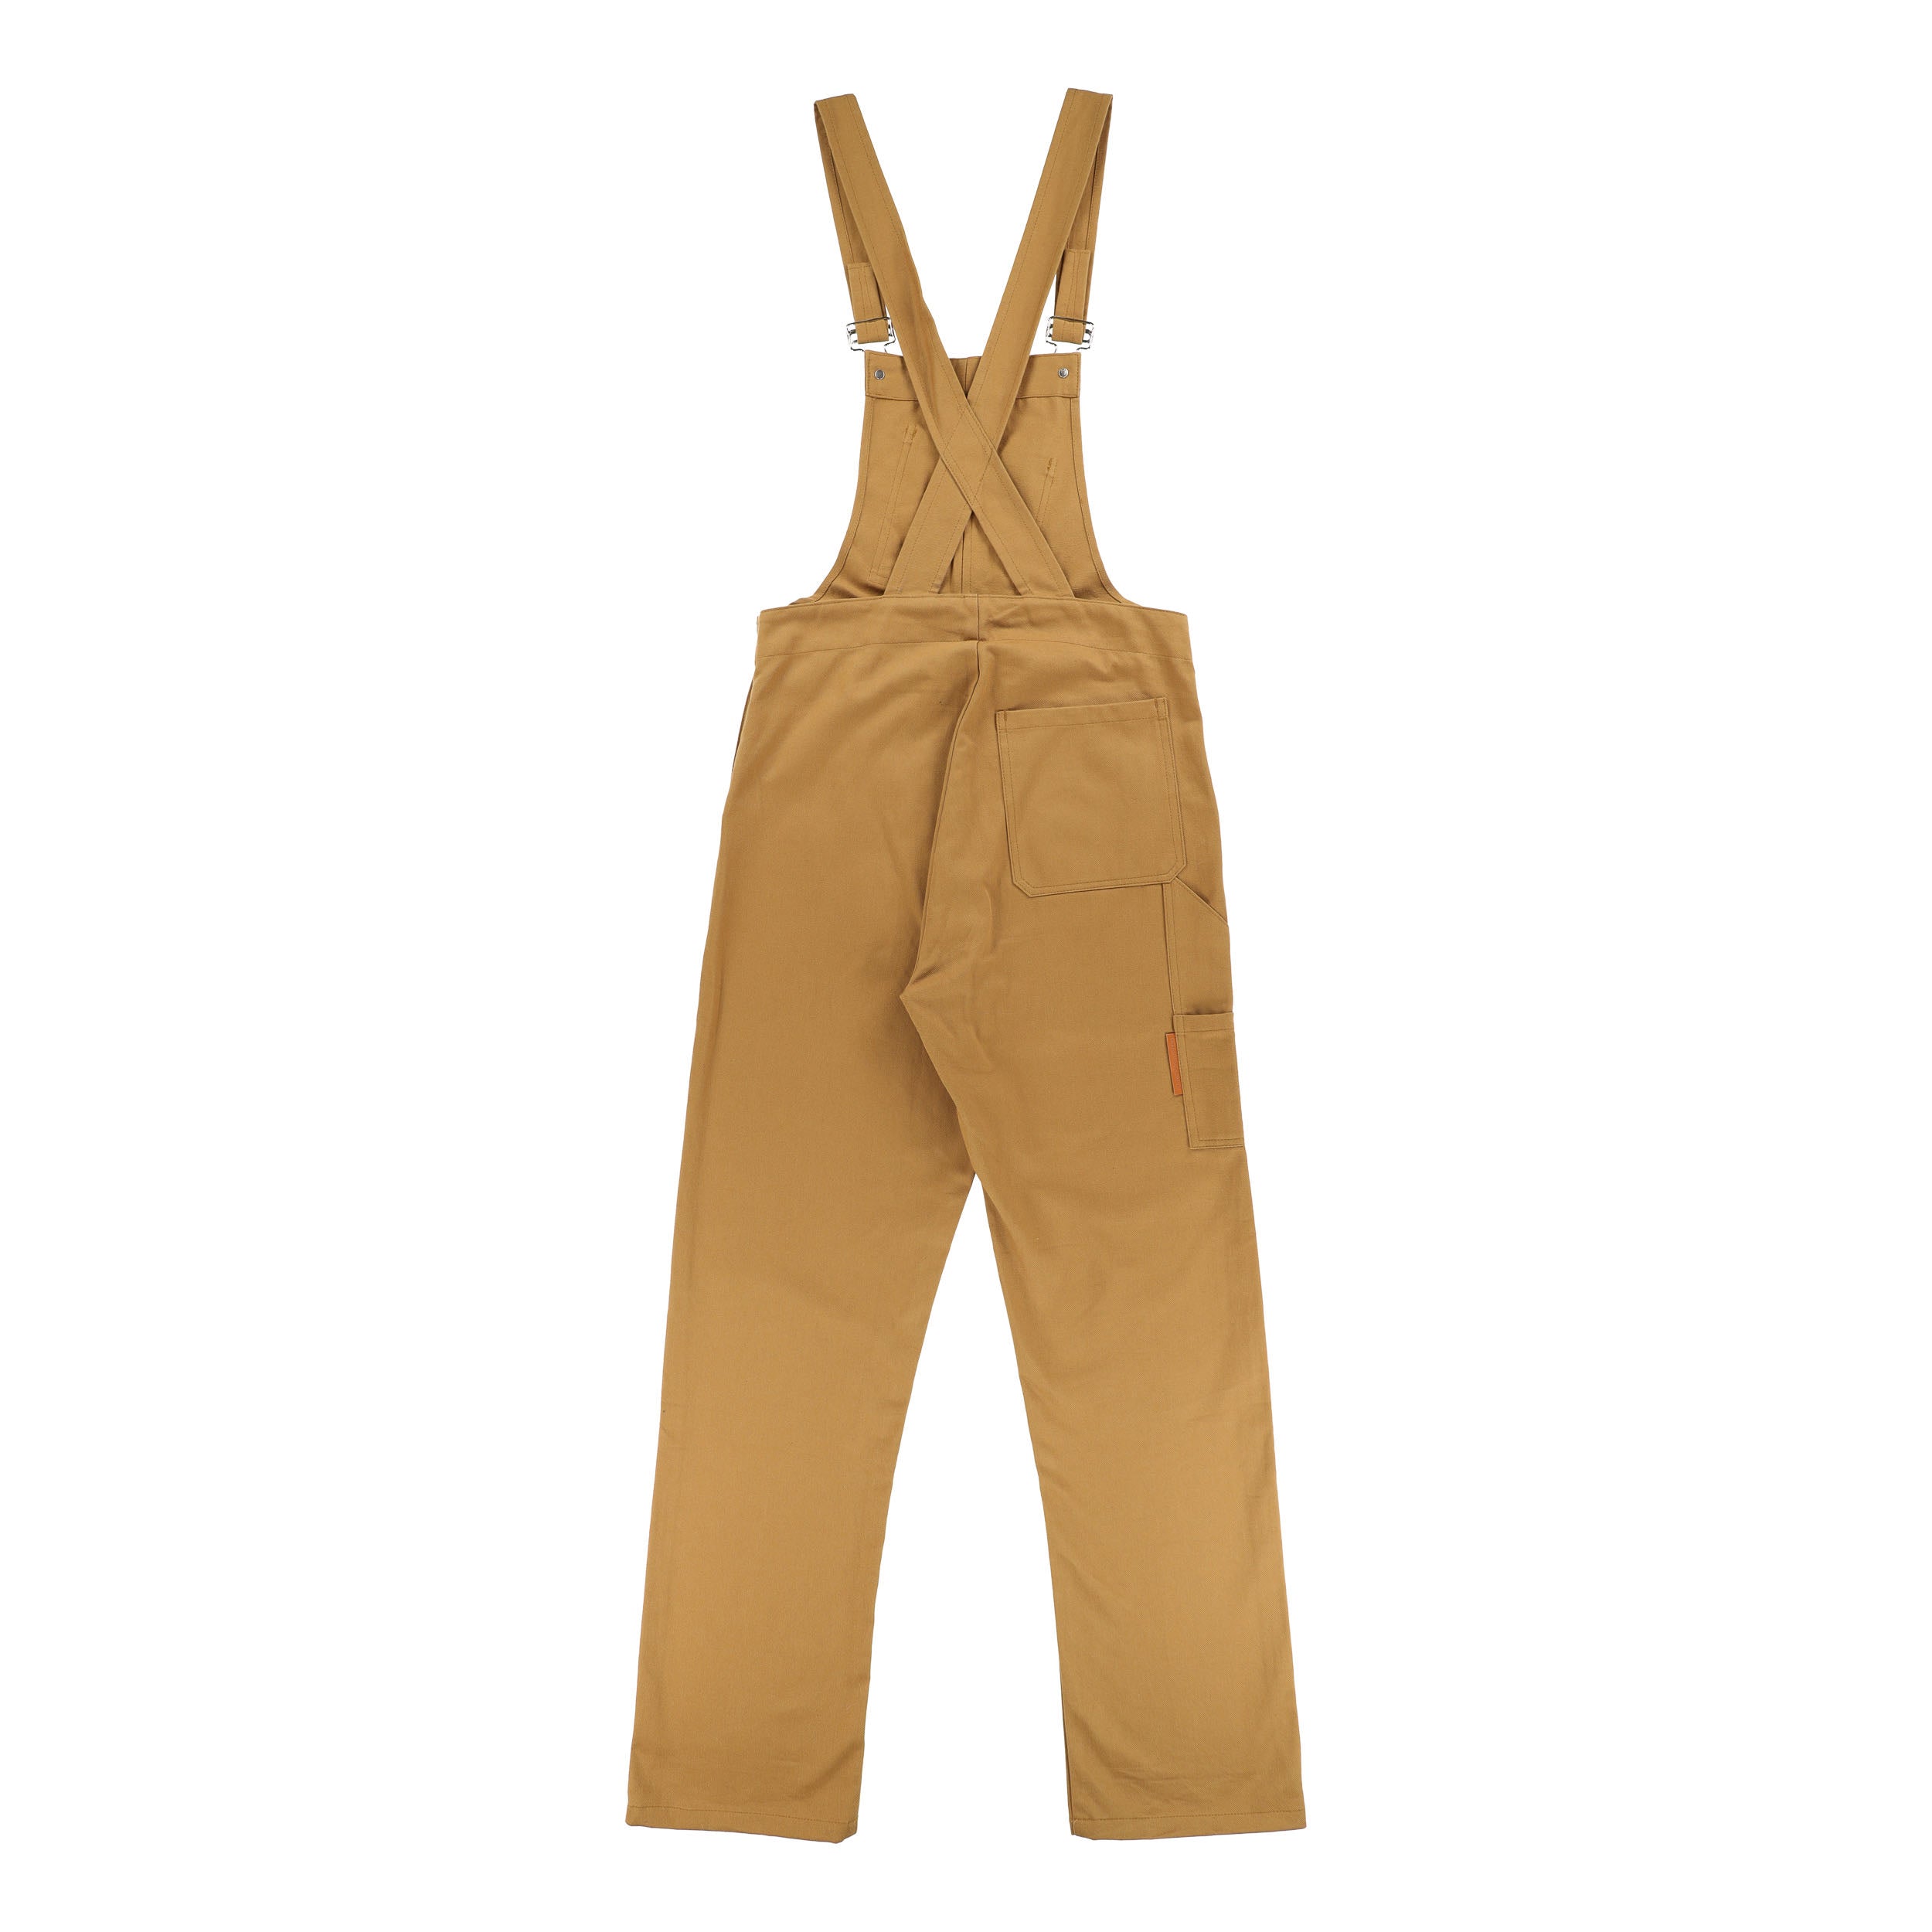 Carrier Company Men's Dungarees in Tan